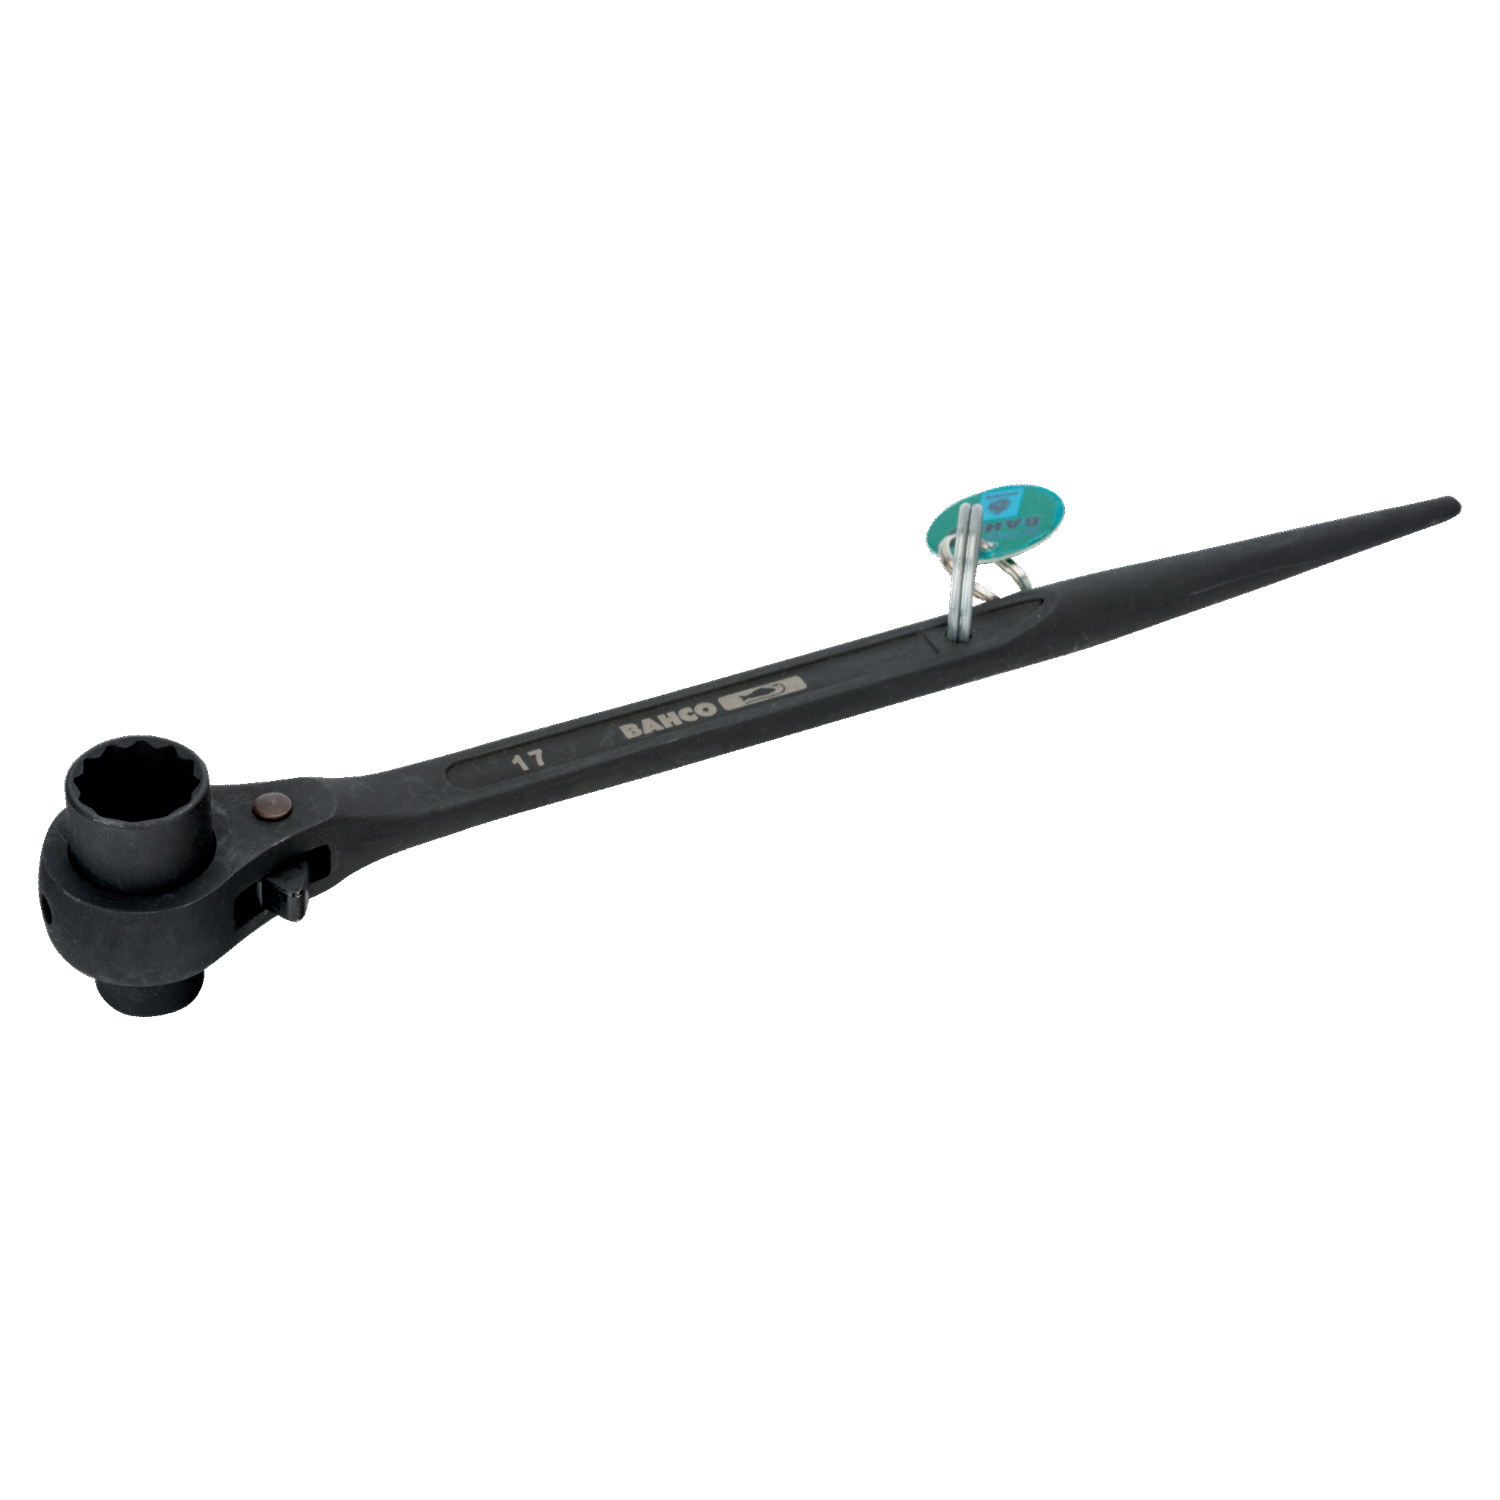 BAHCO TAHSC2RM Ratchet Wrench with Safety Ring and Dee Shackle - Premium Ratchet Wrench from BAHCO - Shop now at Yew Aik.